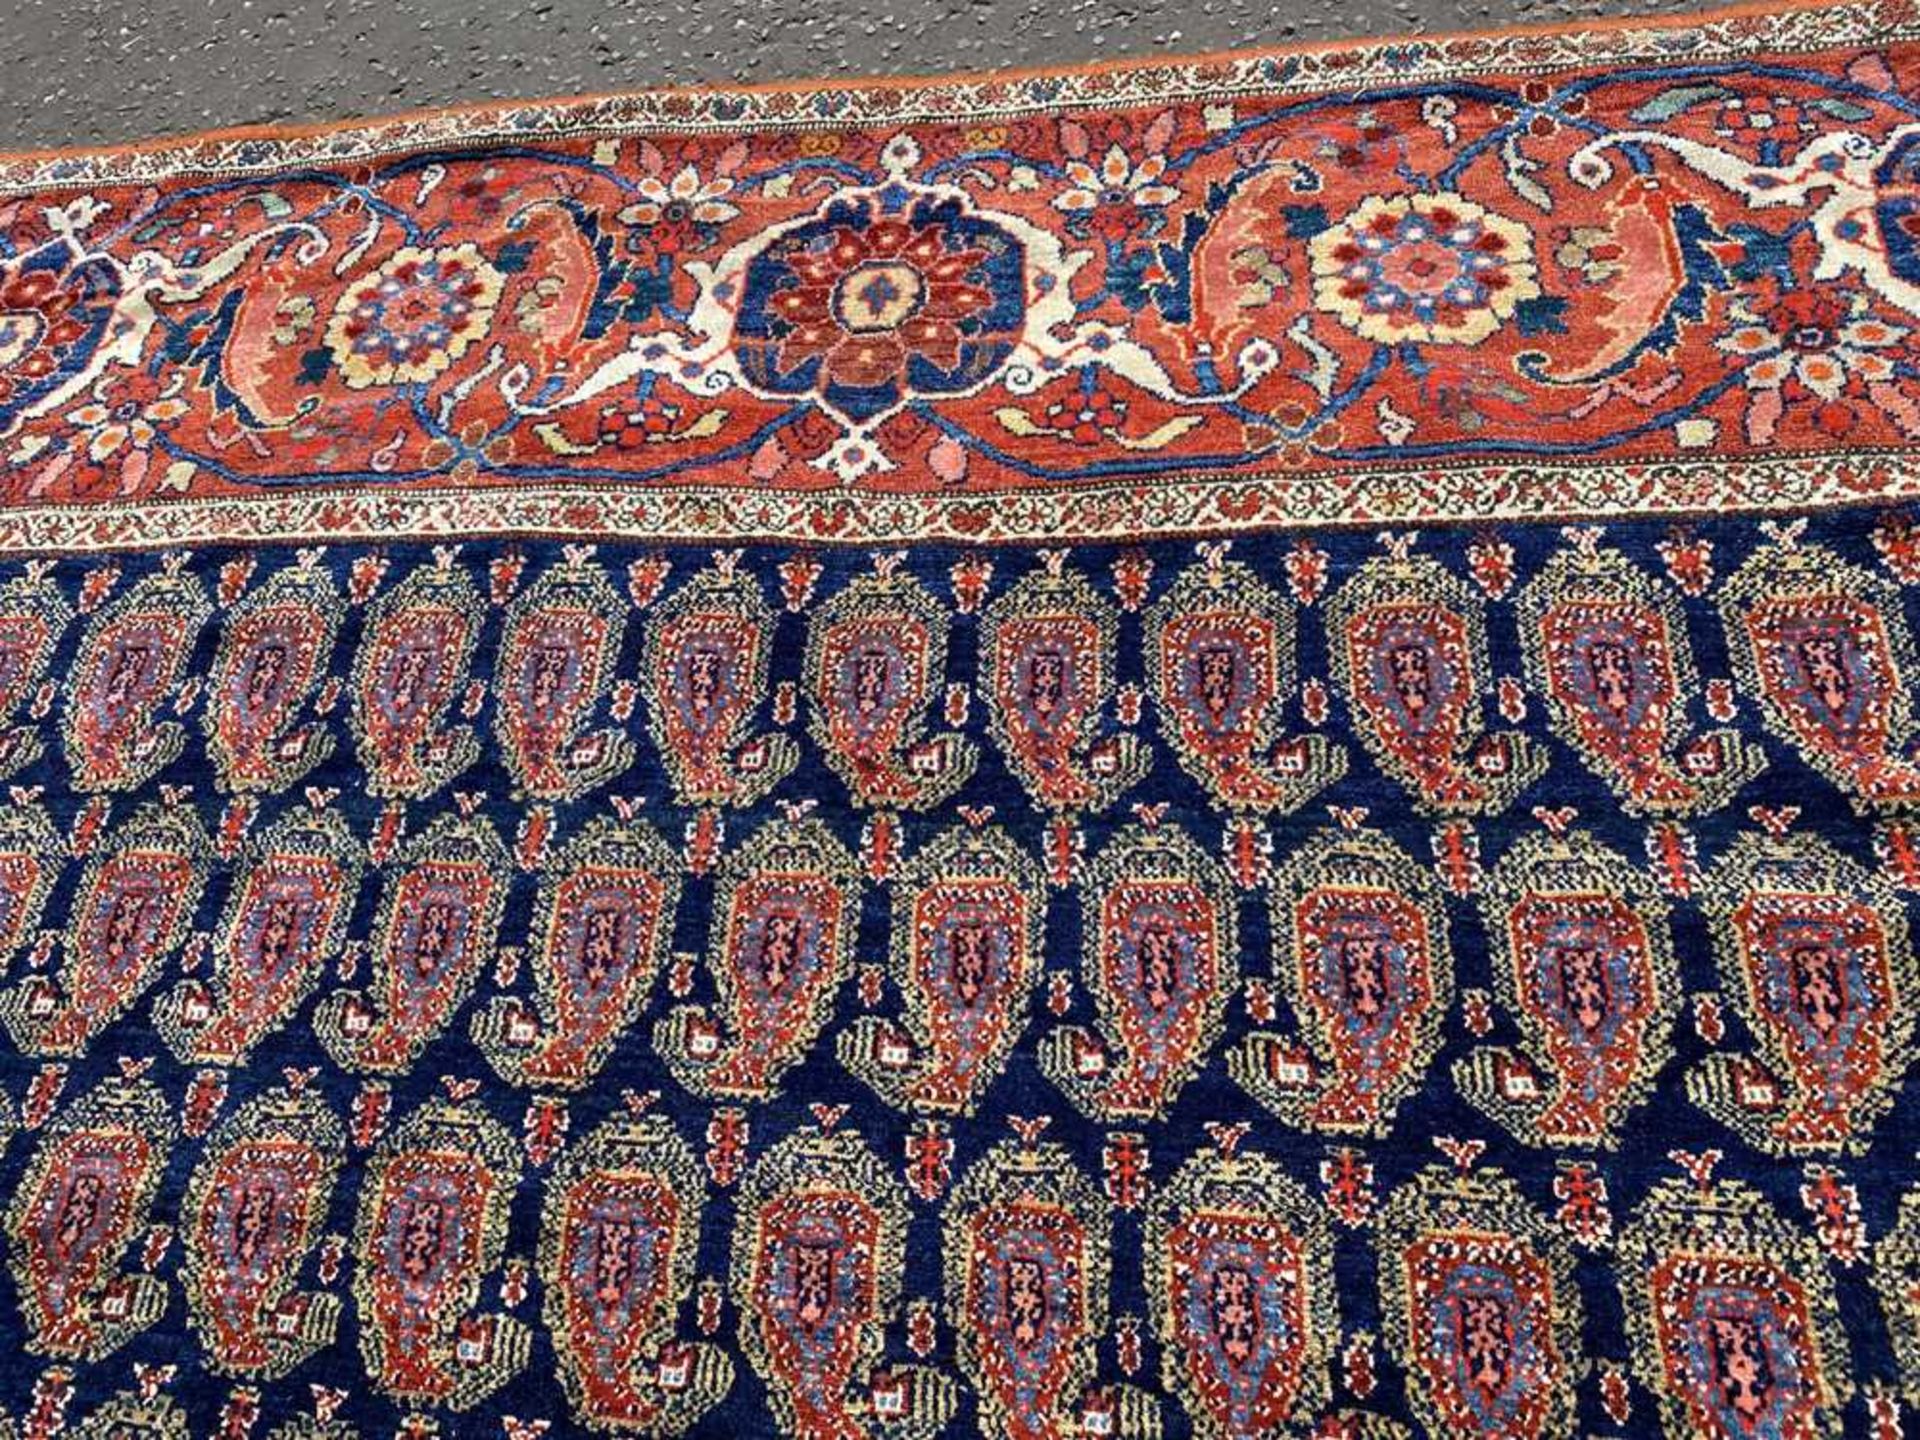 LARGE BAKHTIARI CARPET WEST PERSIA, LATE 19TH/EARLY 20TH CENTURY - Image 3 of 8